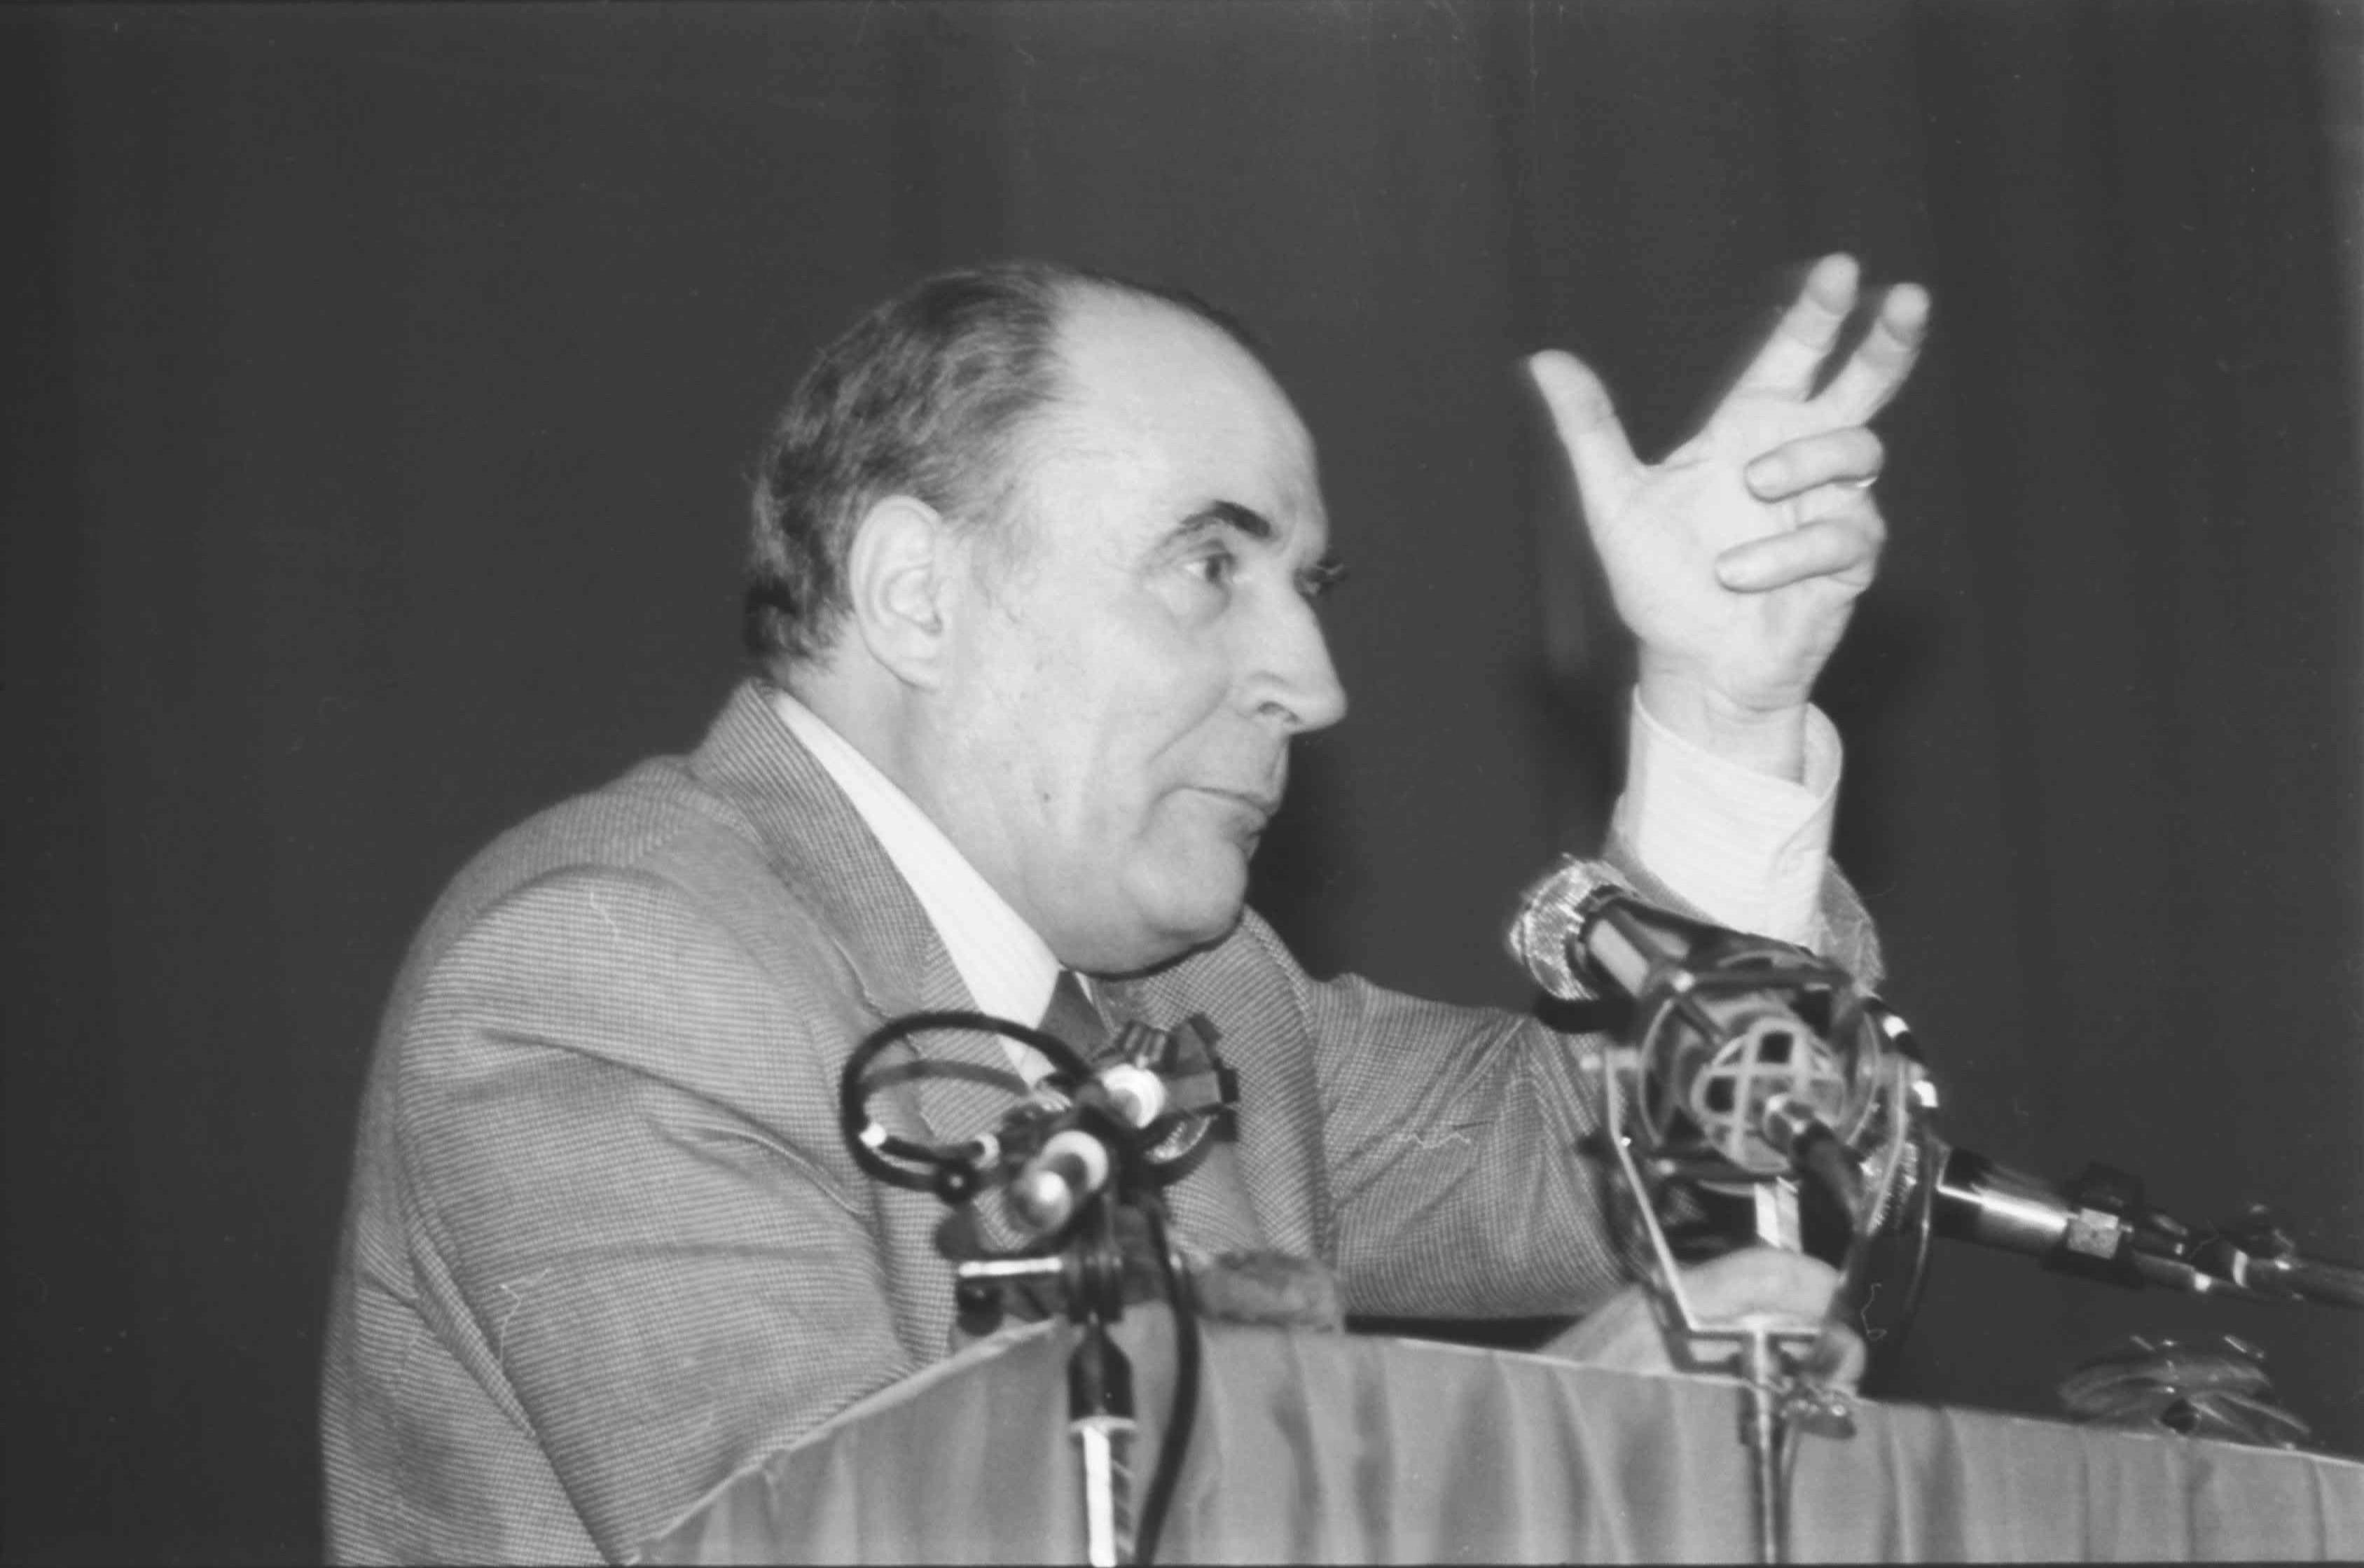 Analyzing Mitterrand's Policy Reforms: Lessons for Today's Political Landscape